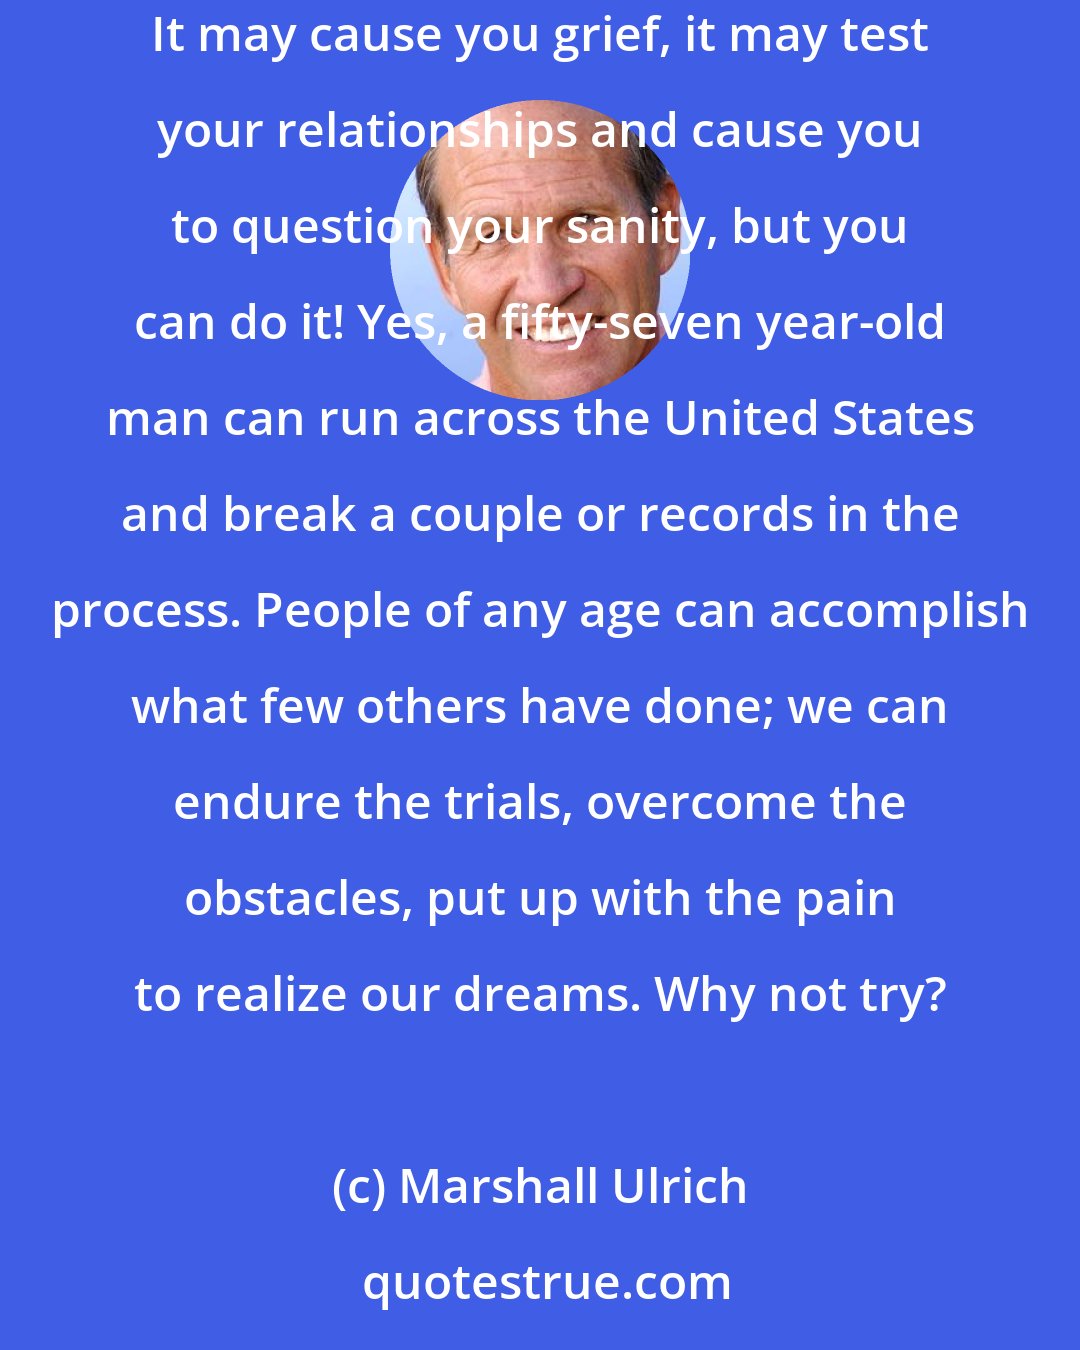 Marshall Ulrich: What I've done serves mostly to show that nearly all limits are self-imposed, a false construct of the mind. You can take on mind-boggling challenges. It may cause you grief, it may test your relationships and cause you to question your sanity, but you can do it! Yes, a fifty-seven year-old man can run across the United States and break a couple or records in the process. People of any age can accomplish what few others have done; we can endure the trials, overcome the obstacles, put up with the pain to realize our dreams. Why not try?